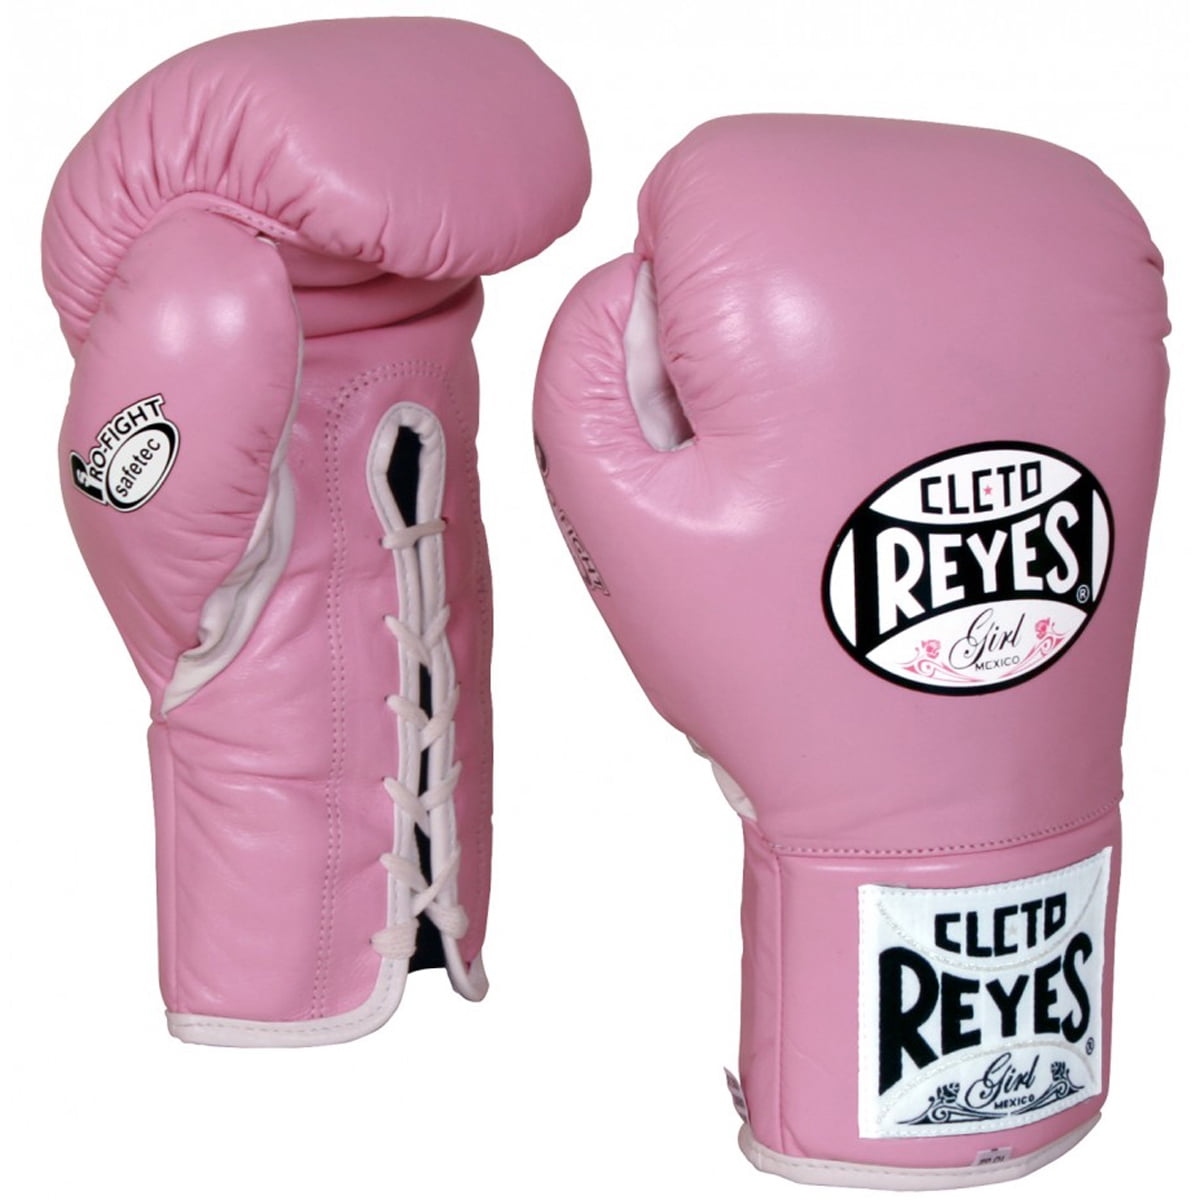 Official Leather Safetec Gloves for Men and Women Cleto Reyes Boxing Gloves